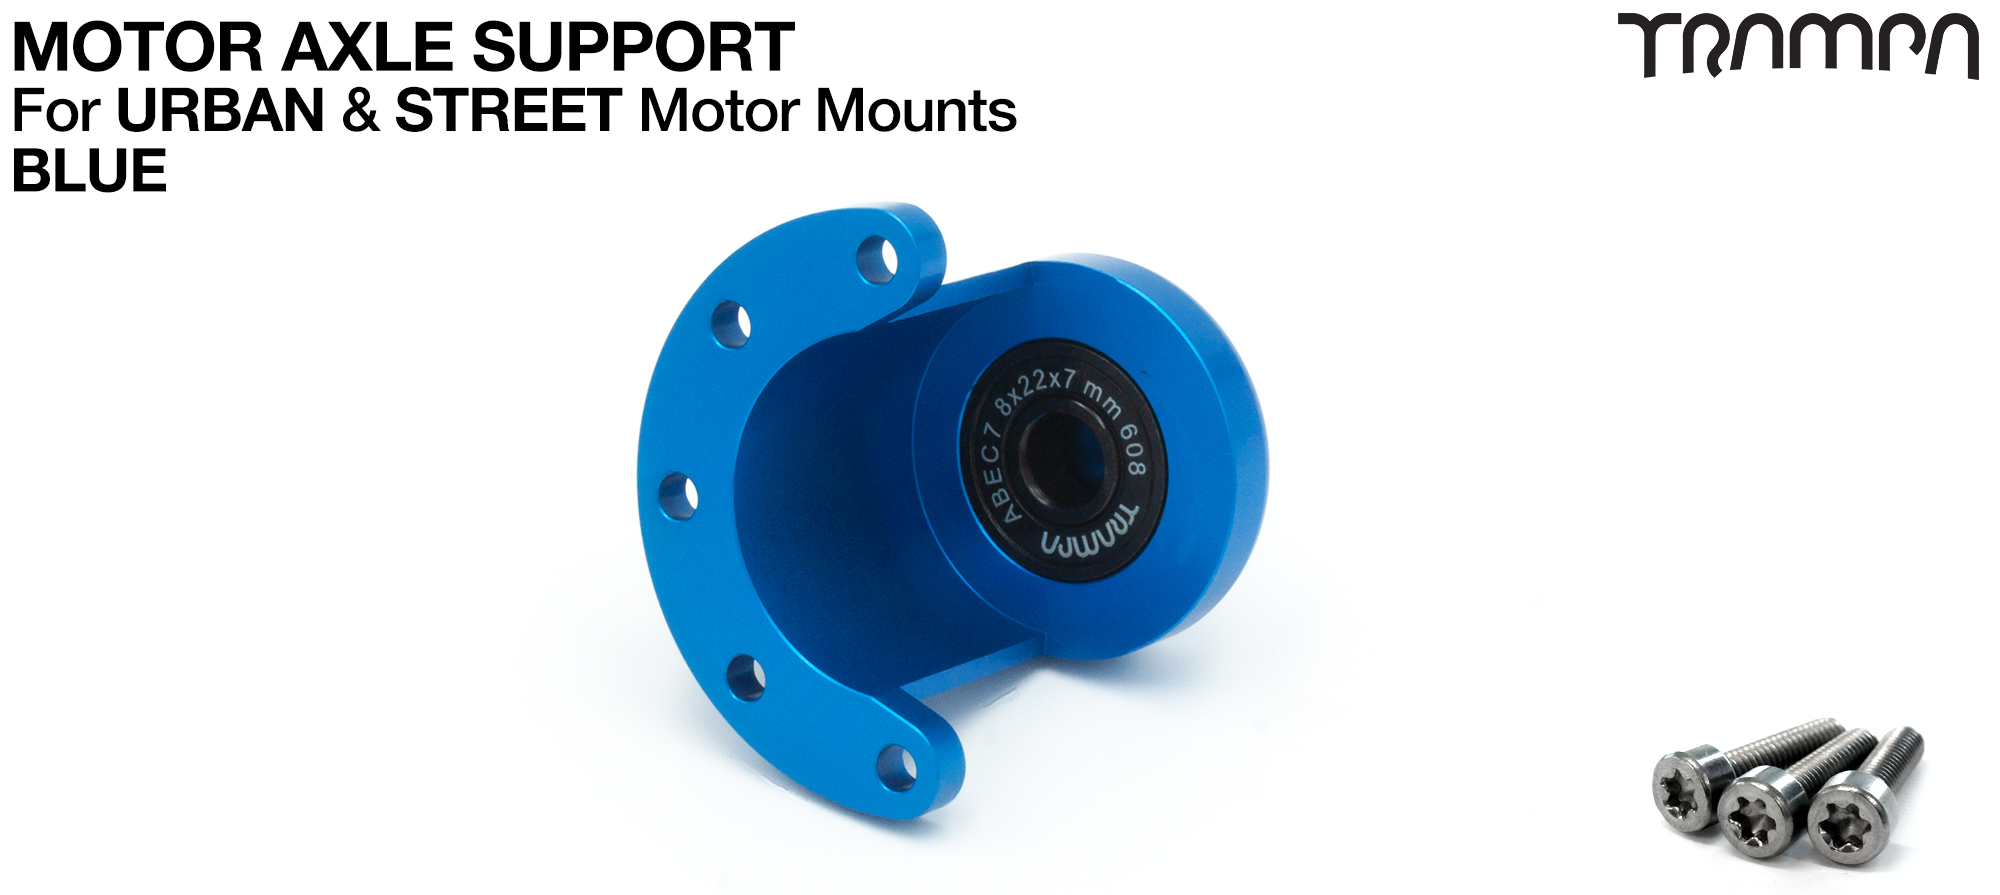 Universal Motor Axle Support Housing - BLUE 